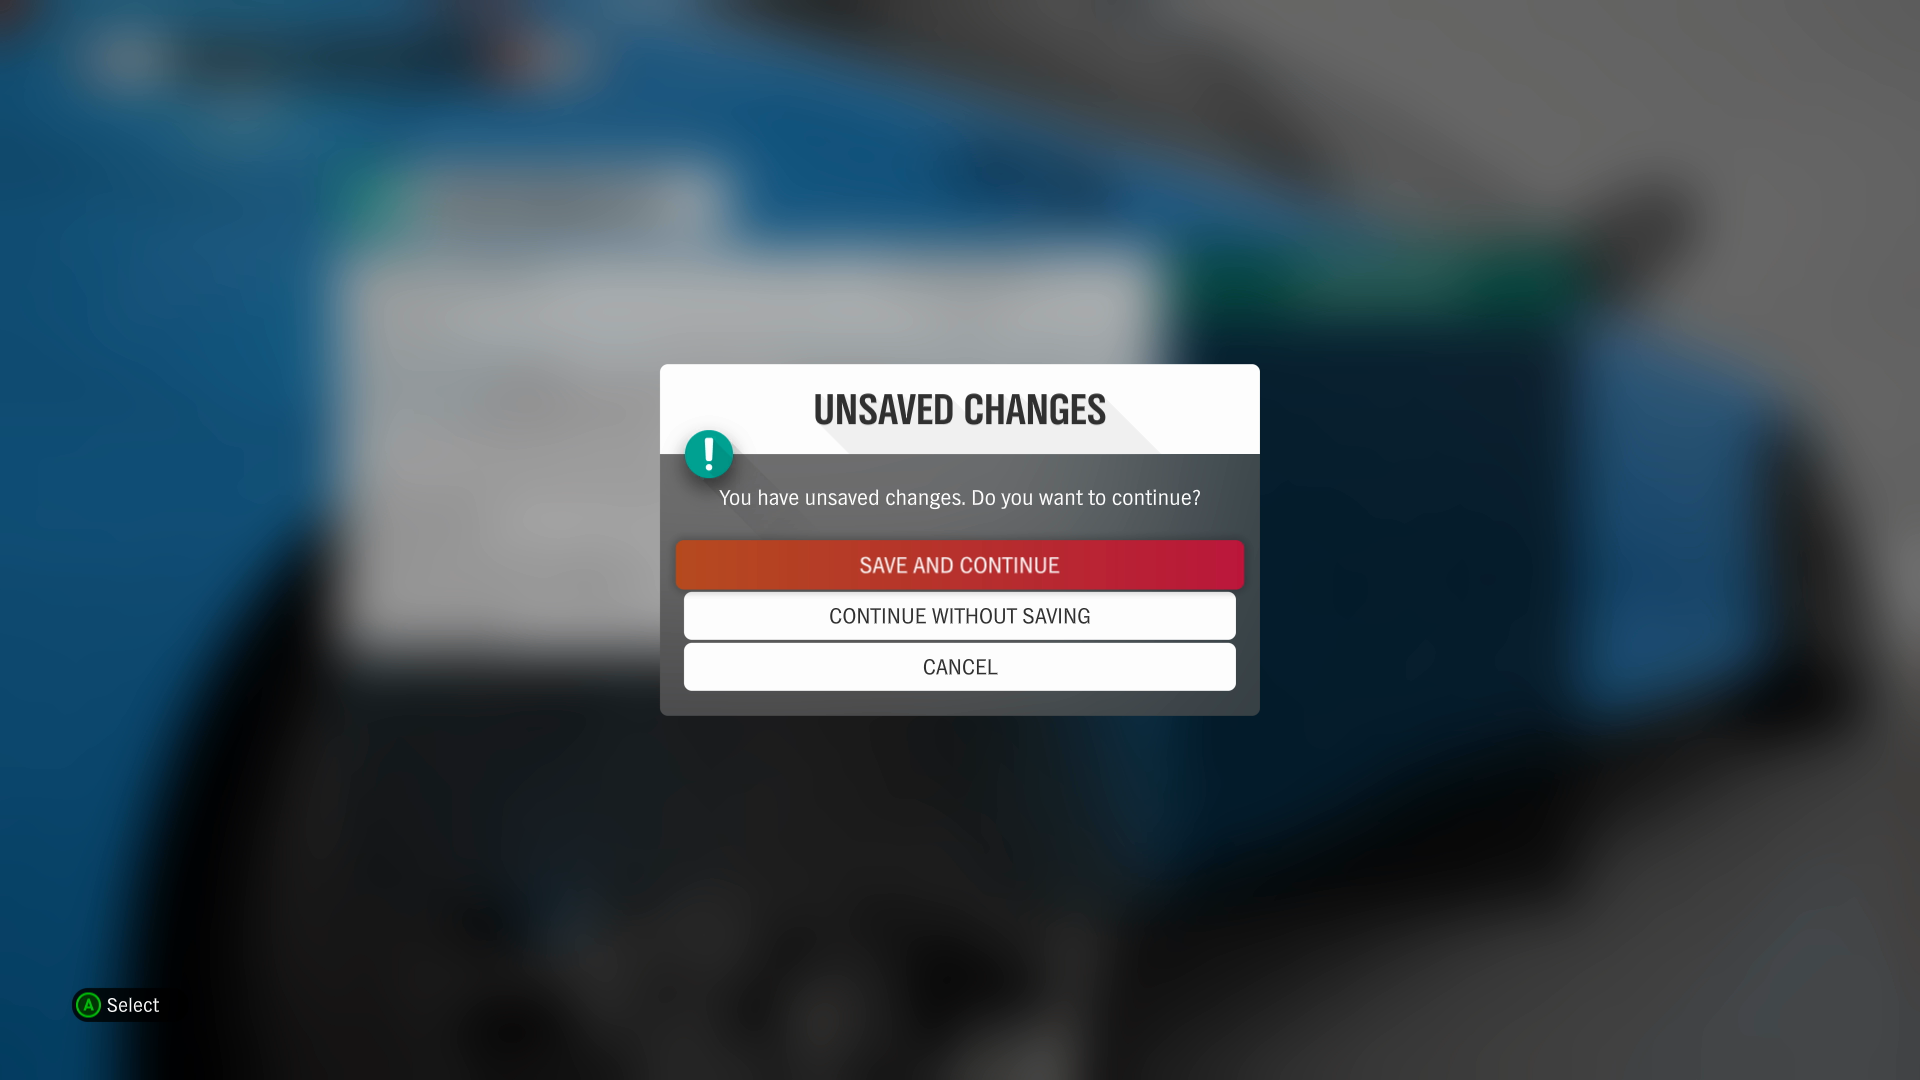 A screenshot from Forza Horizon 4, showing an "Unsaved Changes" warning dialog box. "Save and Continue" is selected.